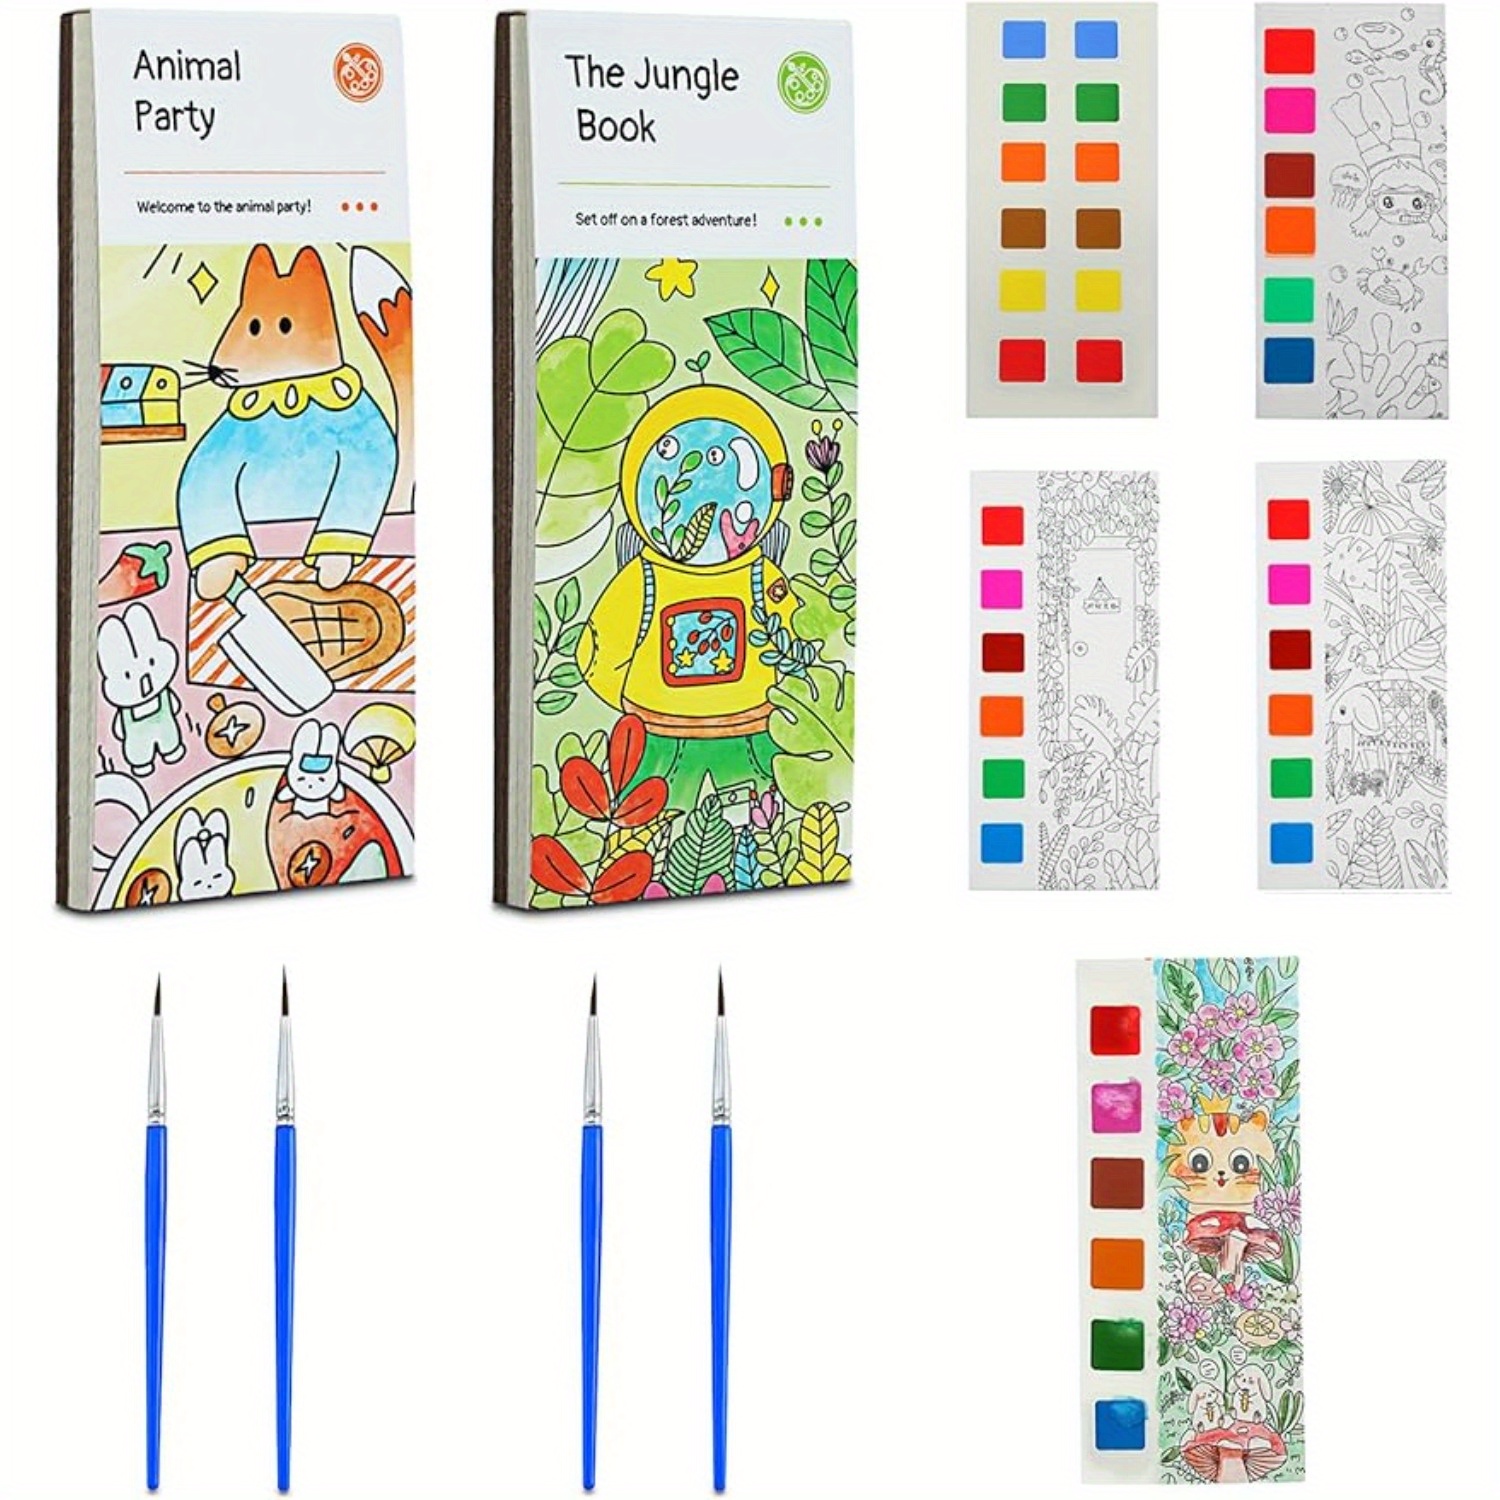  Pocket Watercolor Painting Book, Watercolor Paint Set, Travel  Water Coloring Book Improve Child's Creativity and Concentration, Handmade  Bookmark Mini Art Kit Gift (CHIC Rabbit) : Toys & Games